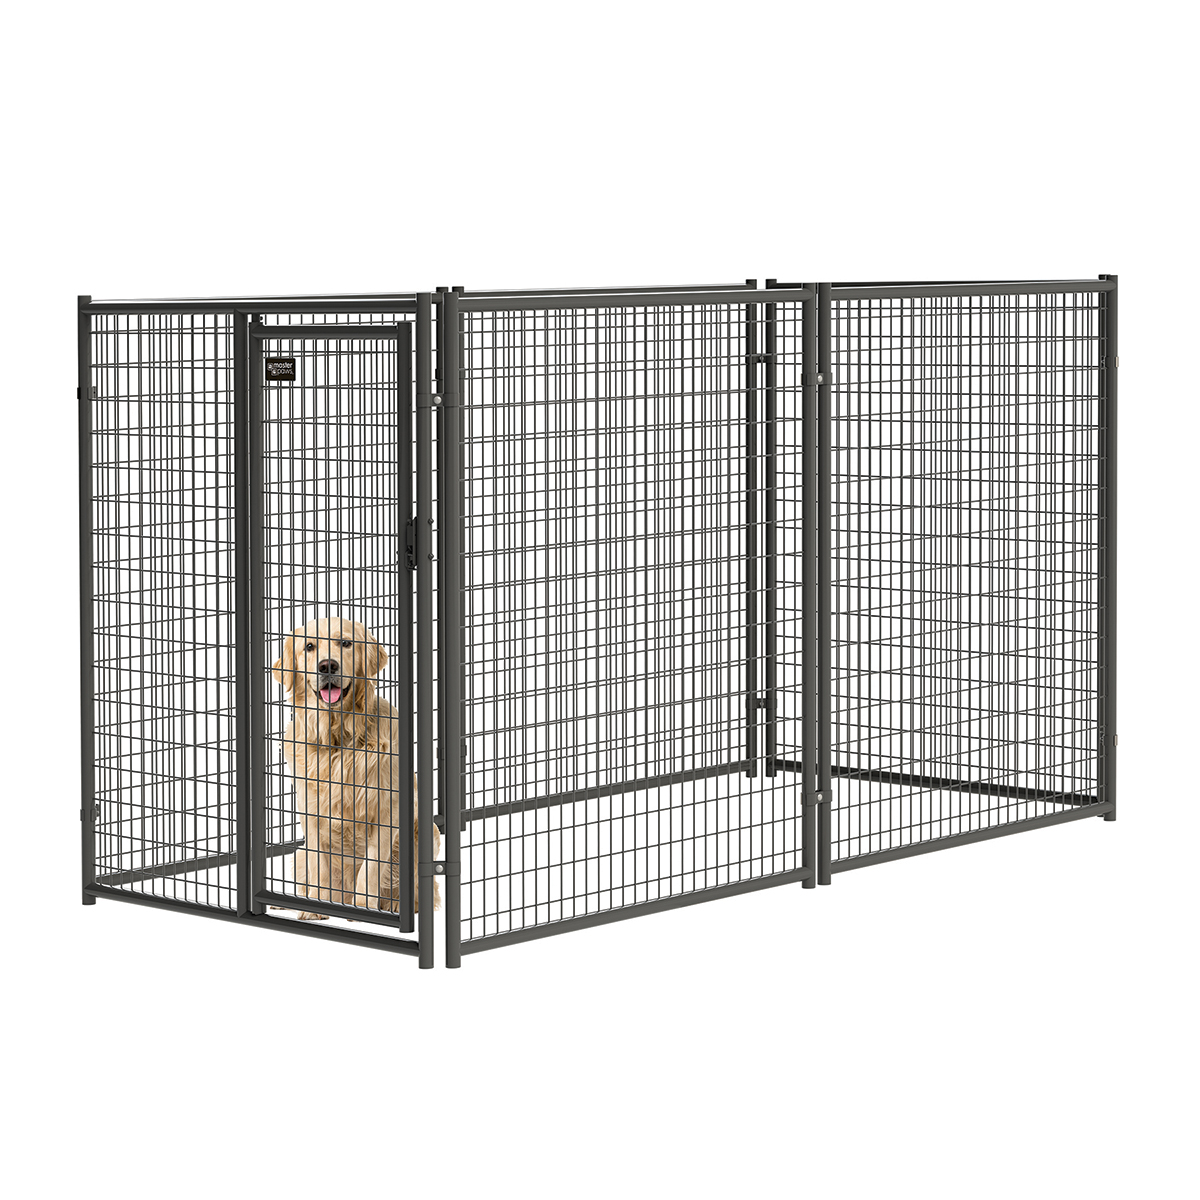 6ft H X 5ft W Commercial Grade Welded Wire Kennel Panel Pet Kennels